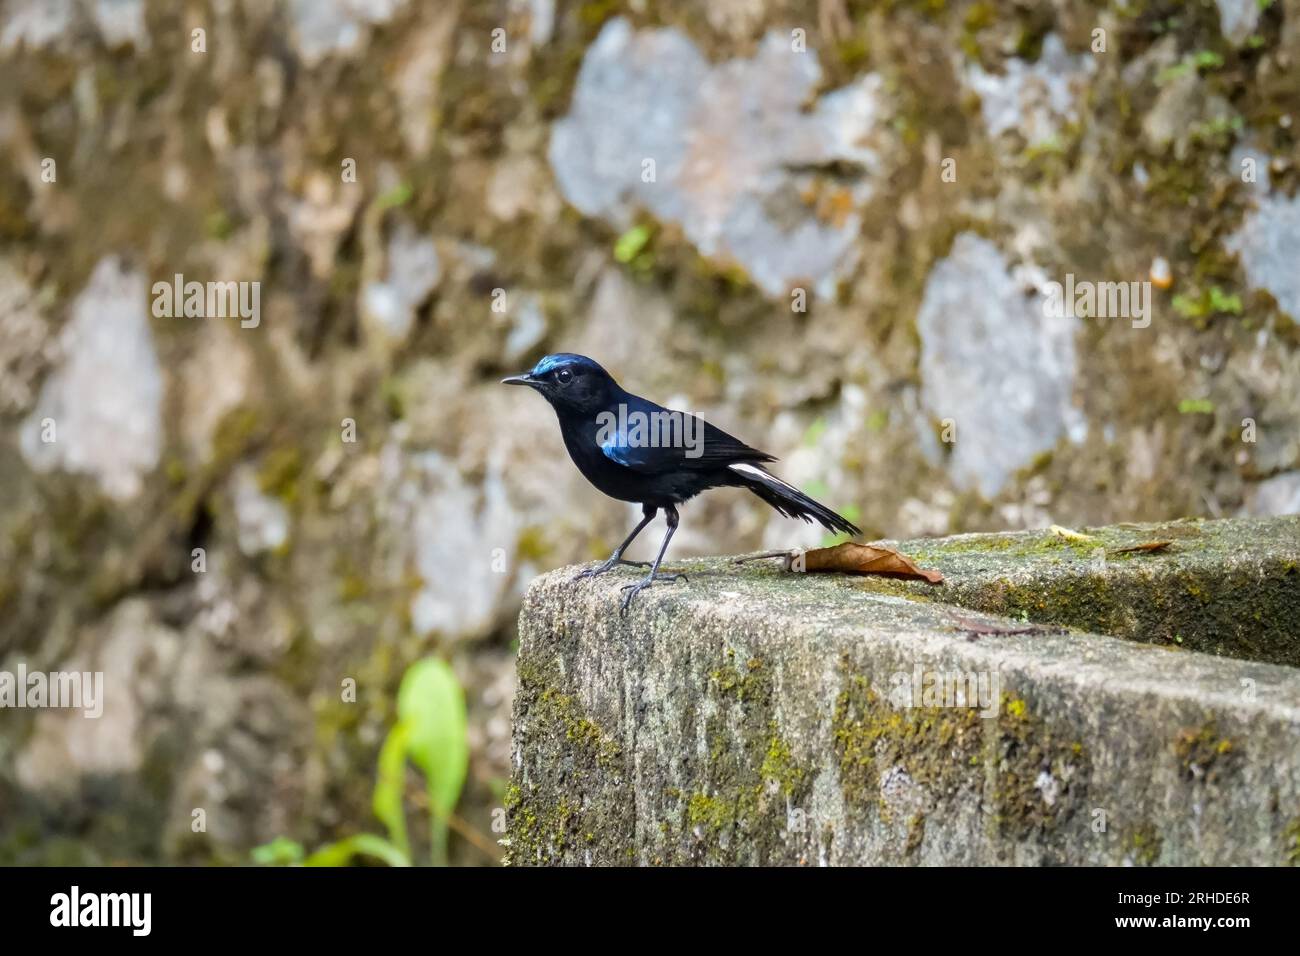 A White-tailed Robin standing on the ground in Fraser's Hill. Cute black and white bird on blurred nature background. Birdwatching, birding in Malaysi Stock Photo